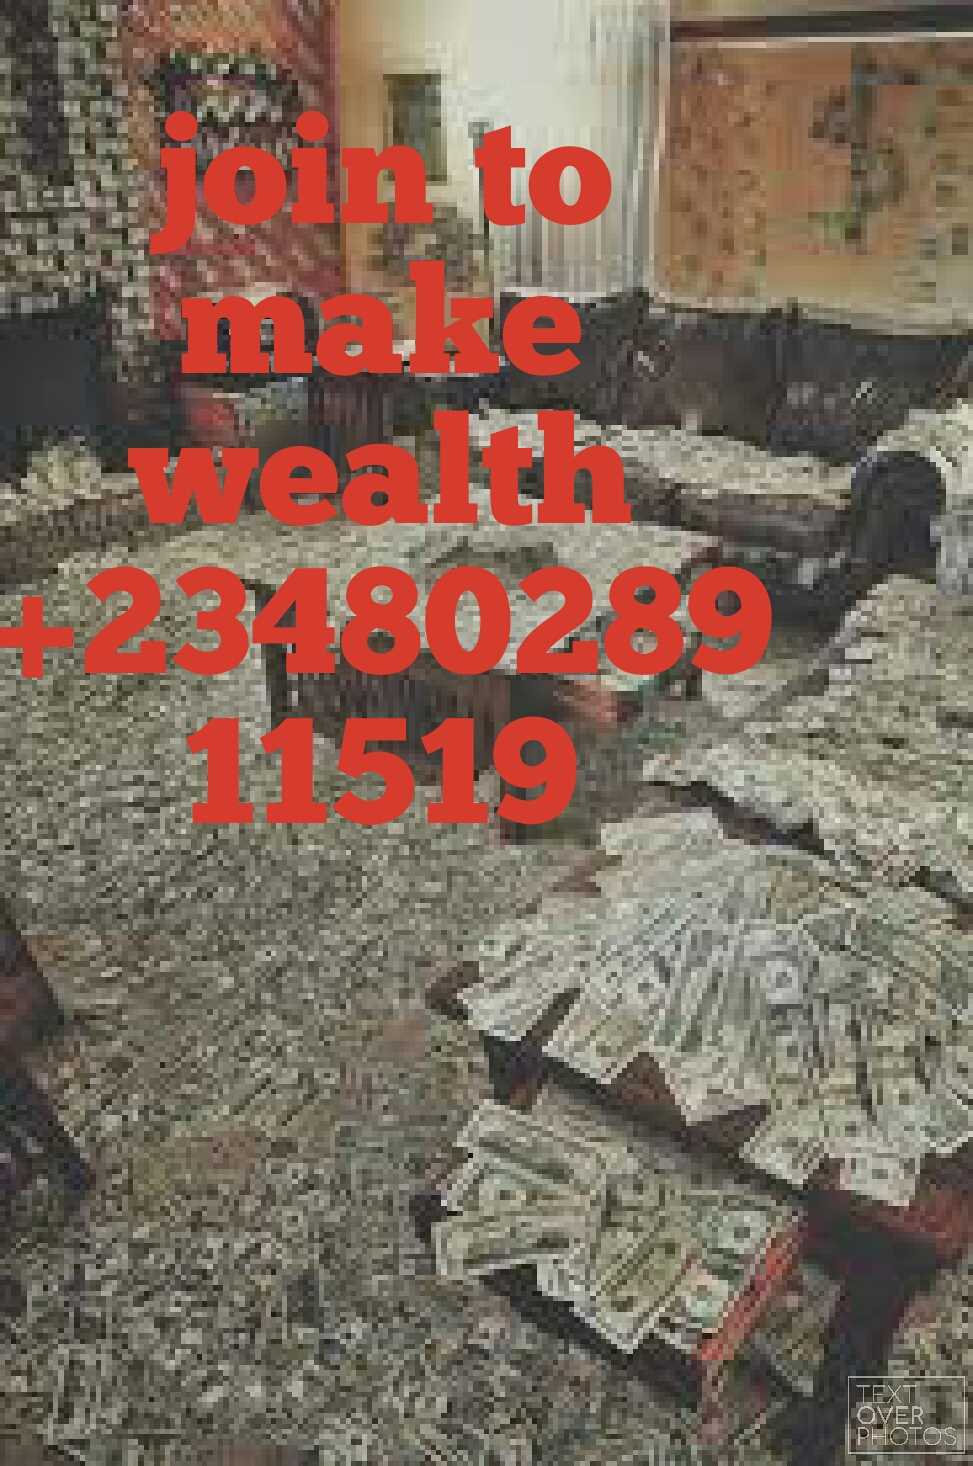 #OCCULT °°+2348028911519 [{{}}] CALL NOW OR WHATSAPP FOR POWERS WEALTH AND RICHES. 